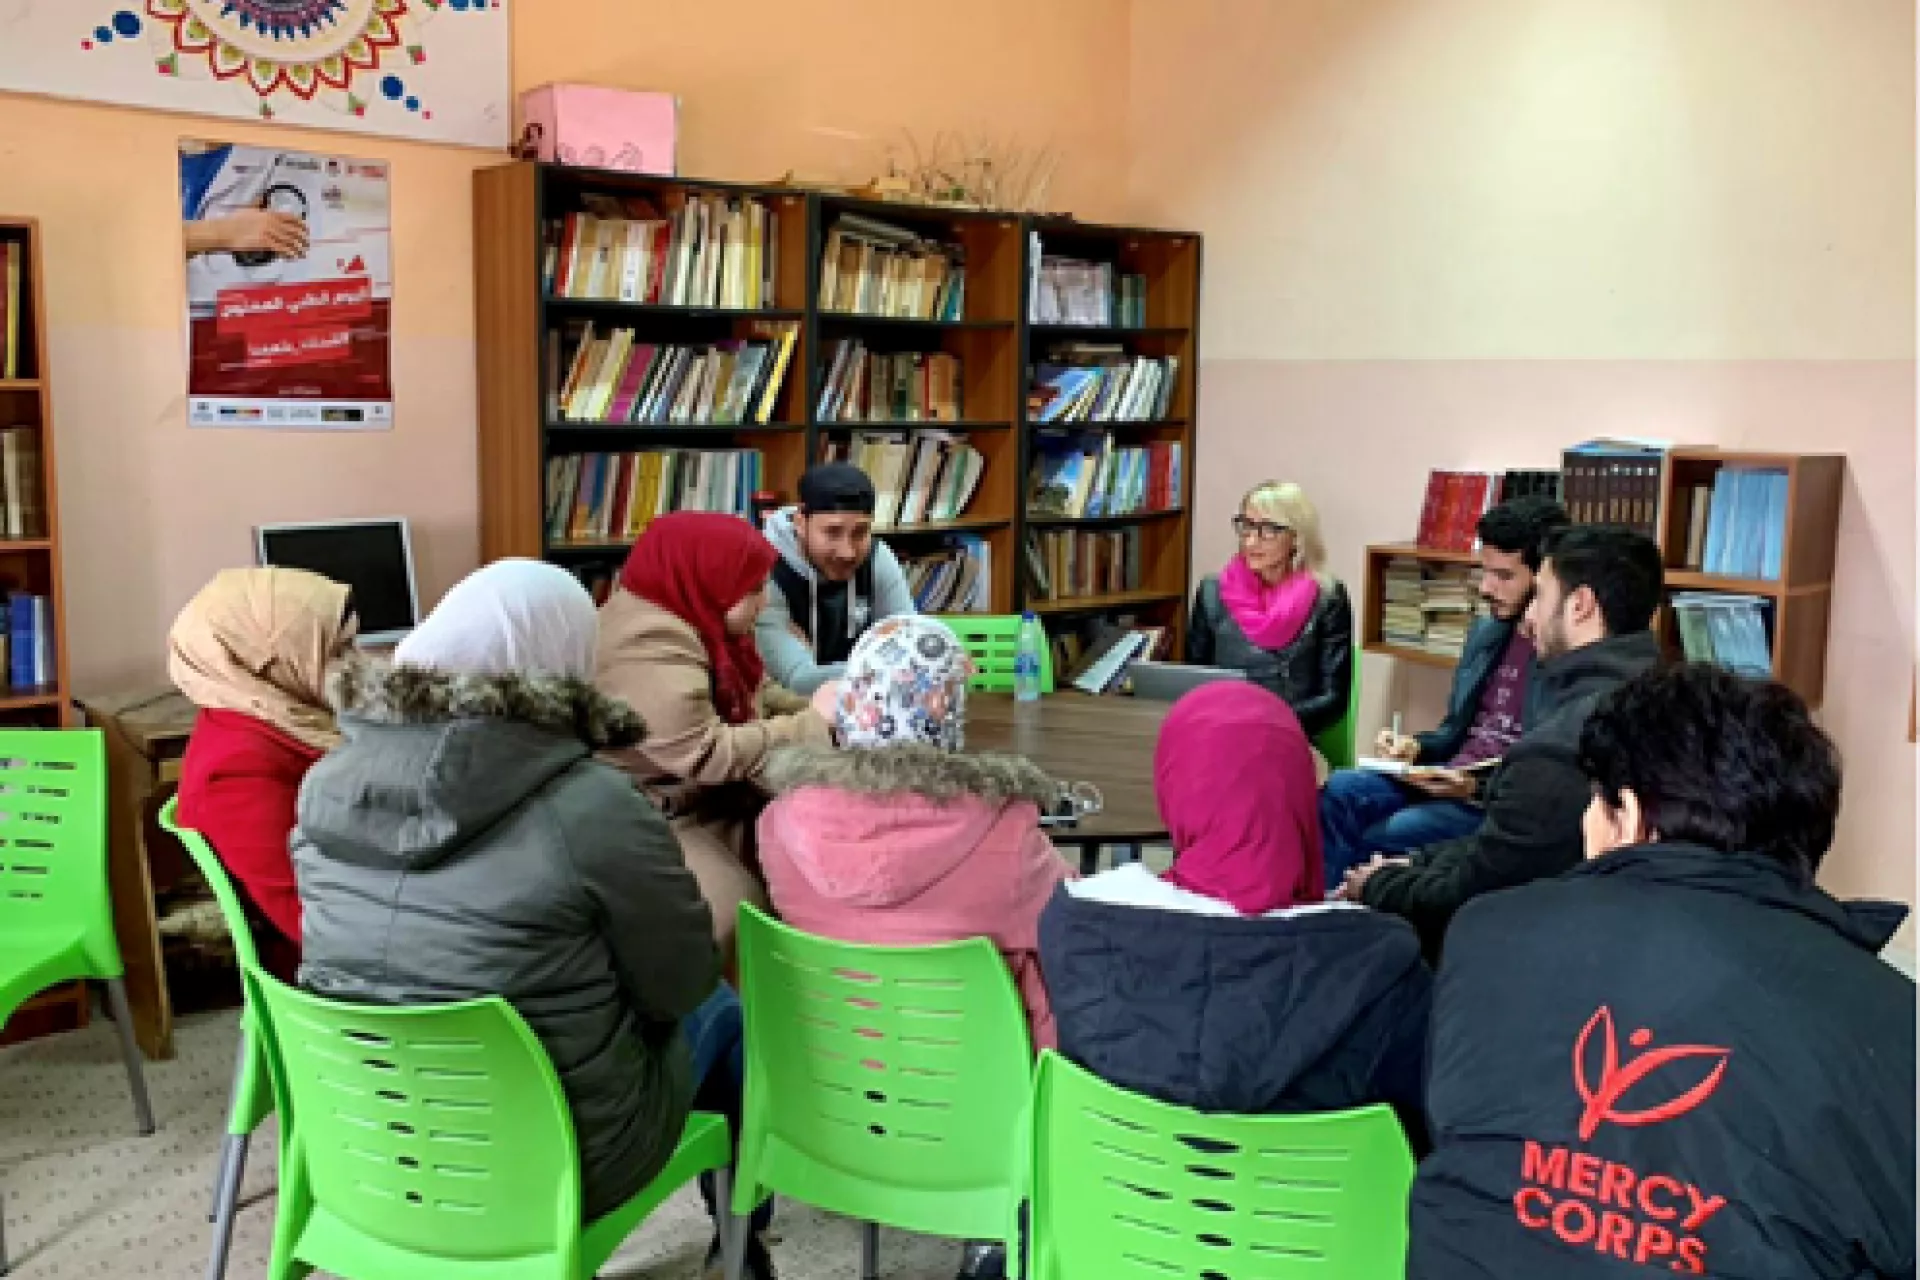 Mercy Corps, UNICEF and Leila Toplic are planning the No Lost Generation Tech Summit in Ajloun, sitting around a table, with book shelves behind.